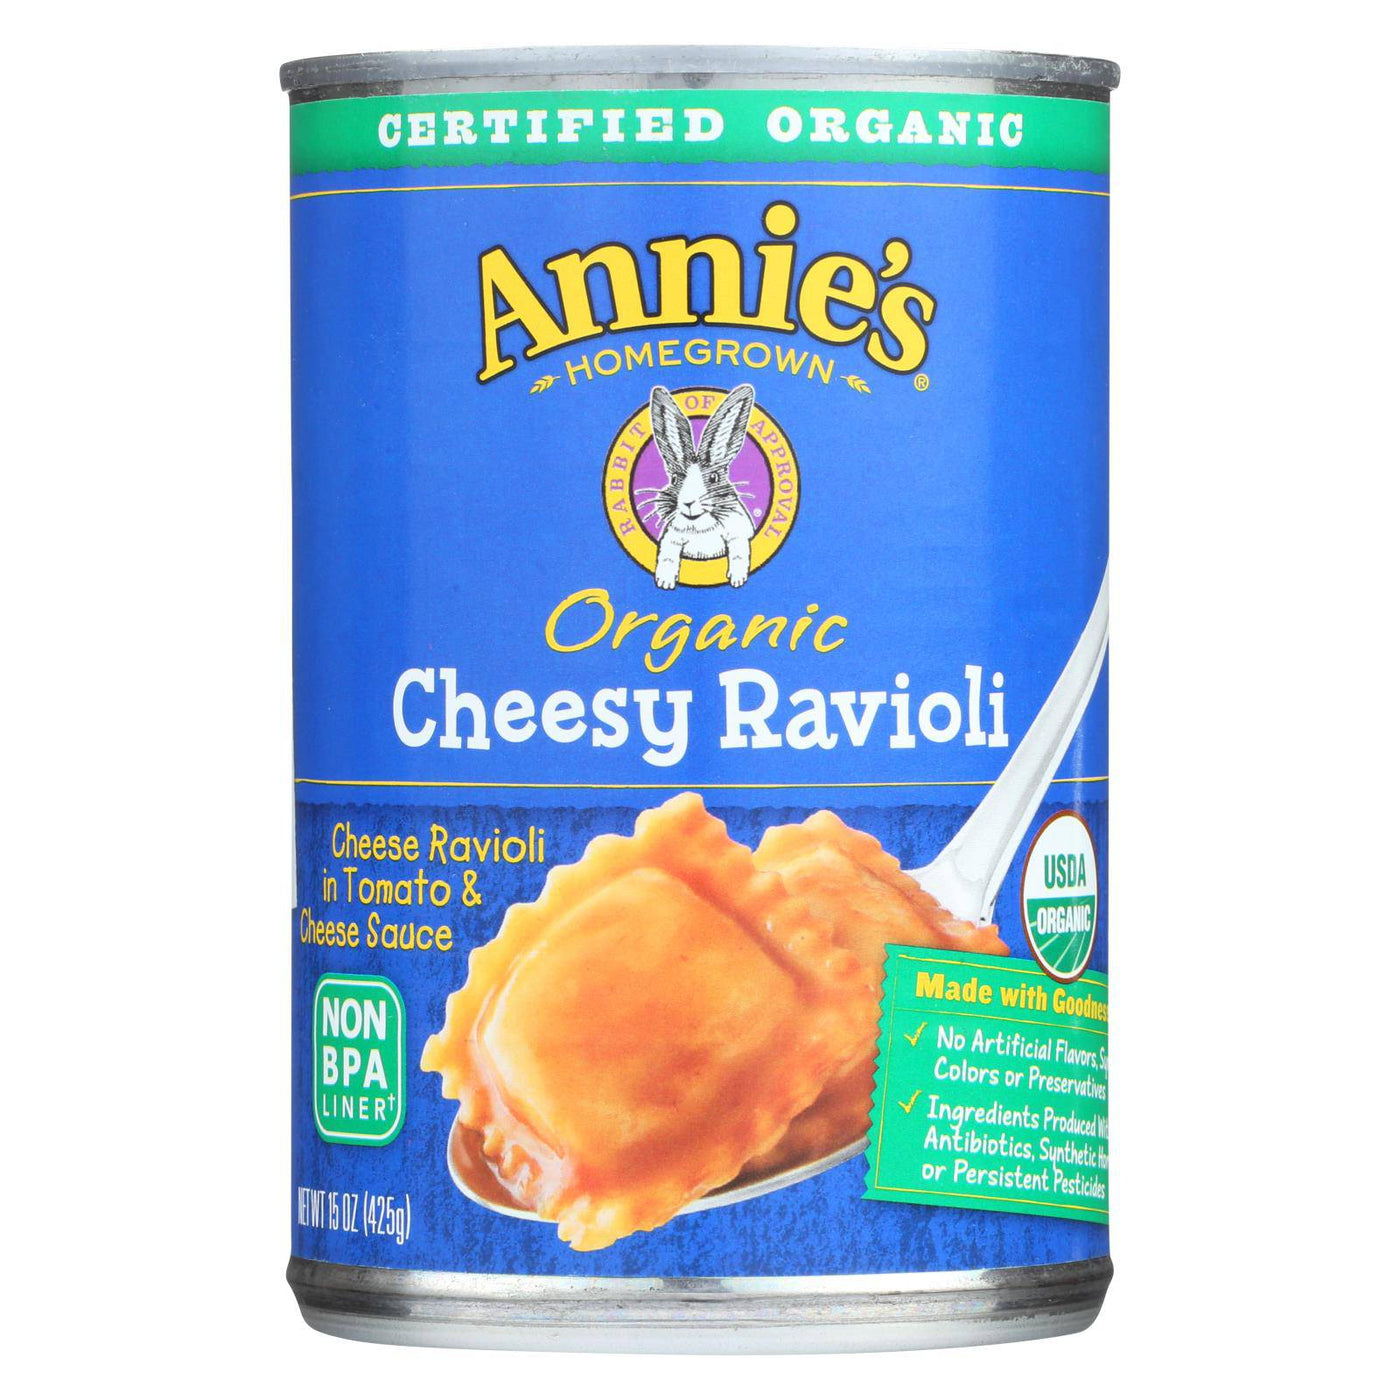 Buy Annie's Homegrown Organic Cheesy Ravioli In Tomato And Cheese Sauce - Case Of 12 - 15 Oz.  at OnlyNaturals.us